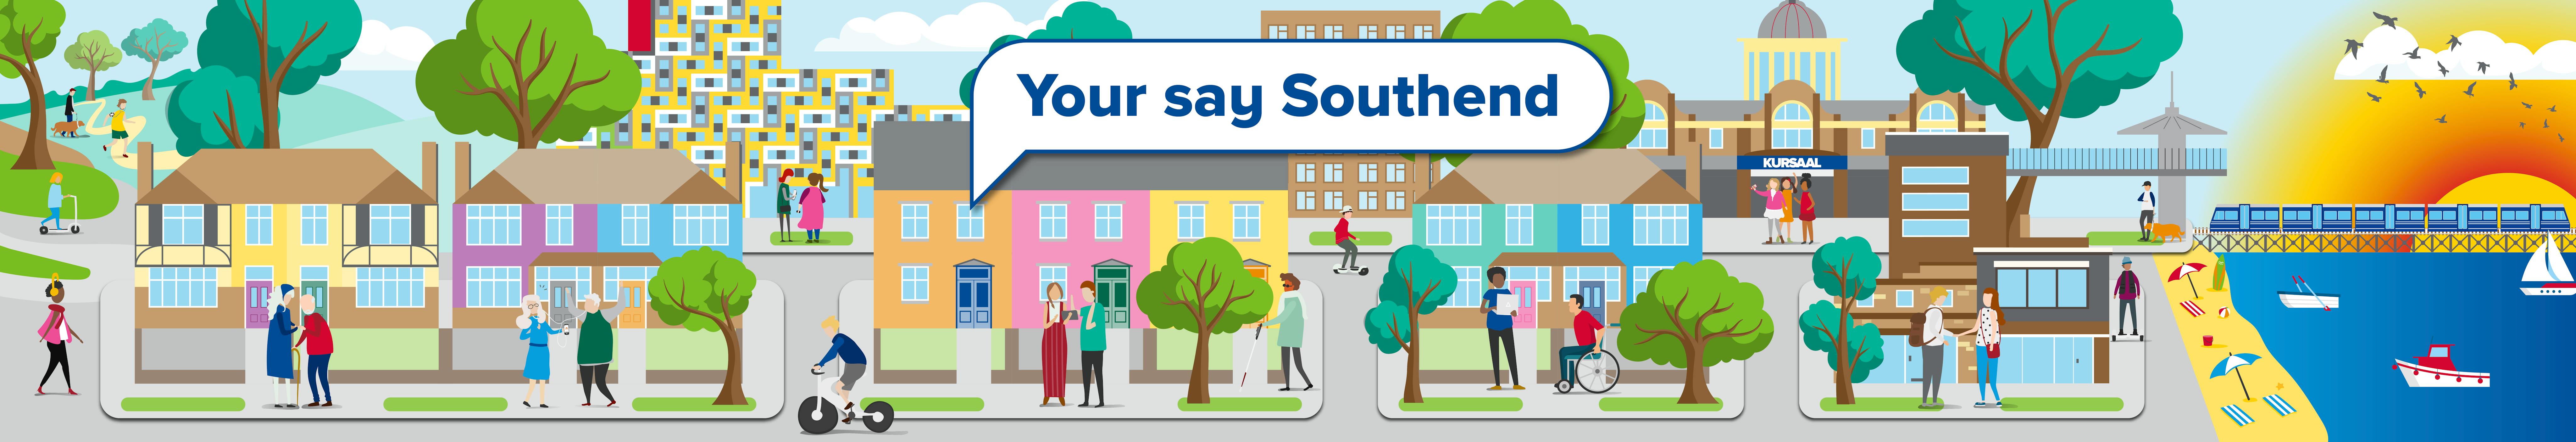 Your Say Southend illustration showing people standing outside their houses, riding a bike, walking with friends and the sun setting over the beach